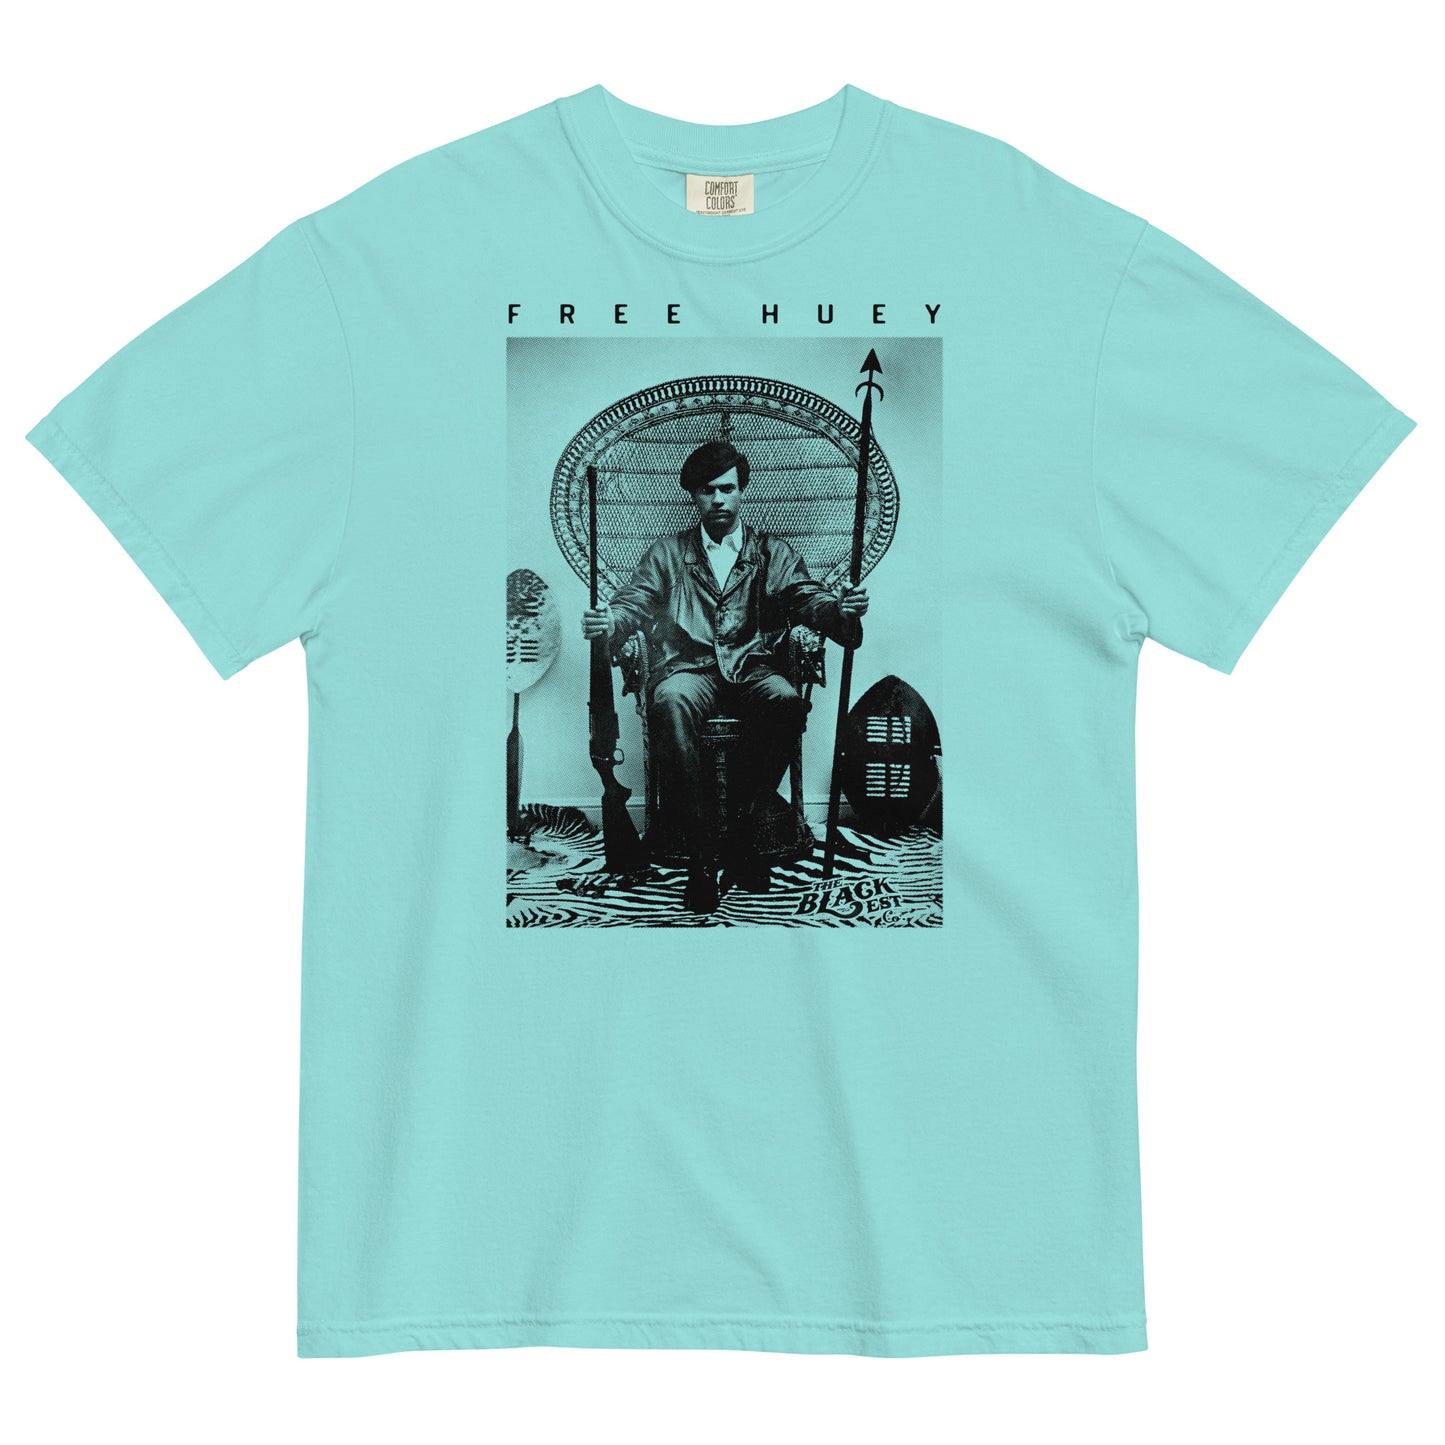 a aqua t shirt with a picture of huey p newton sitting on a wicker chair